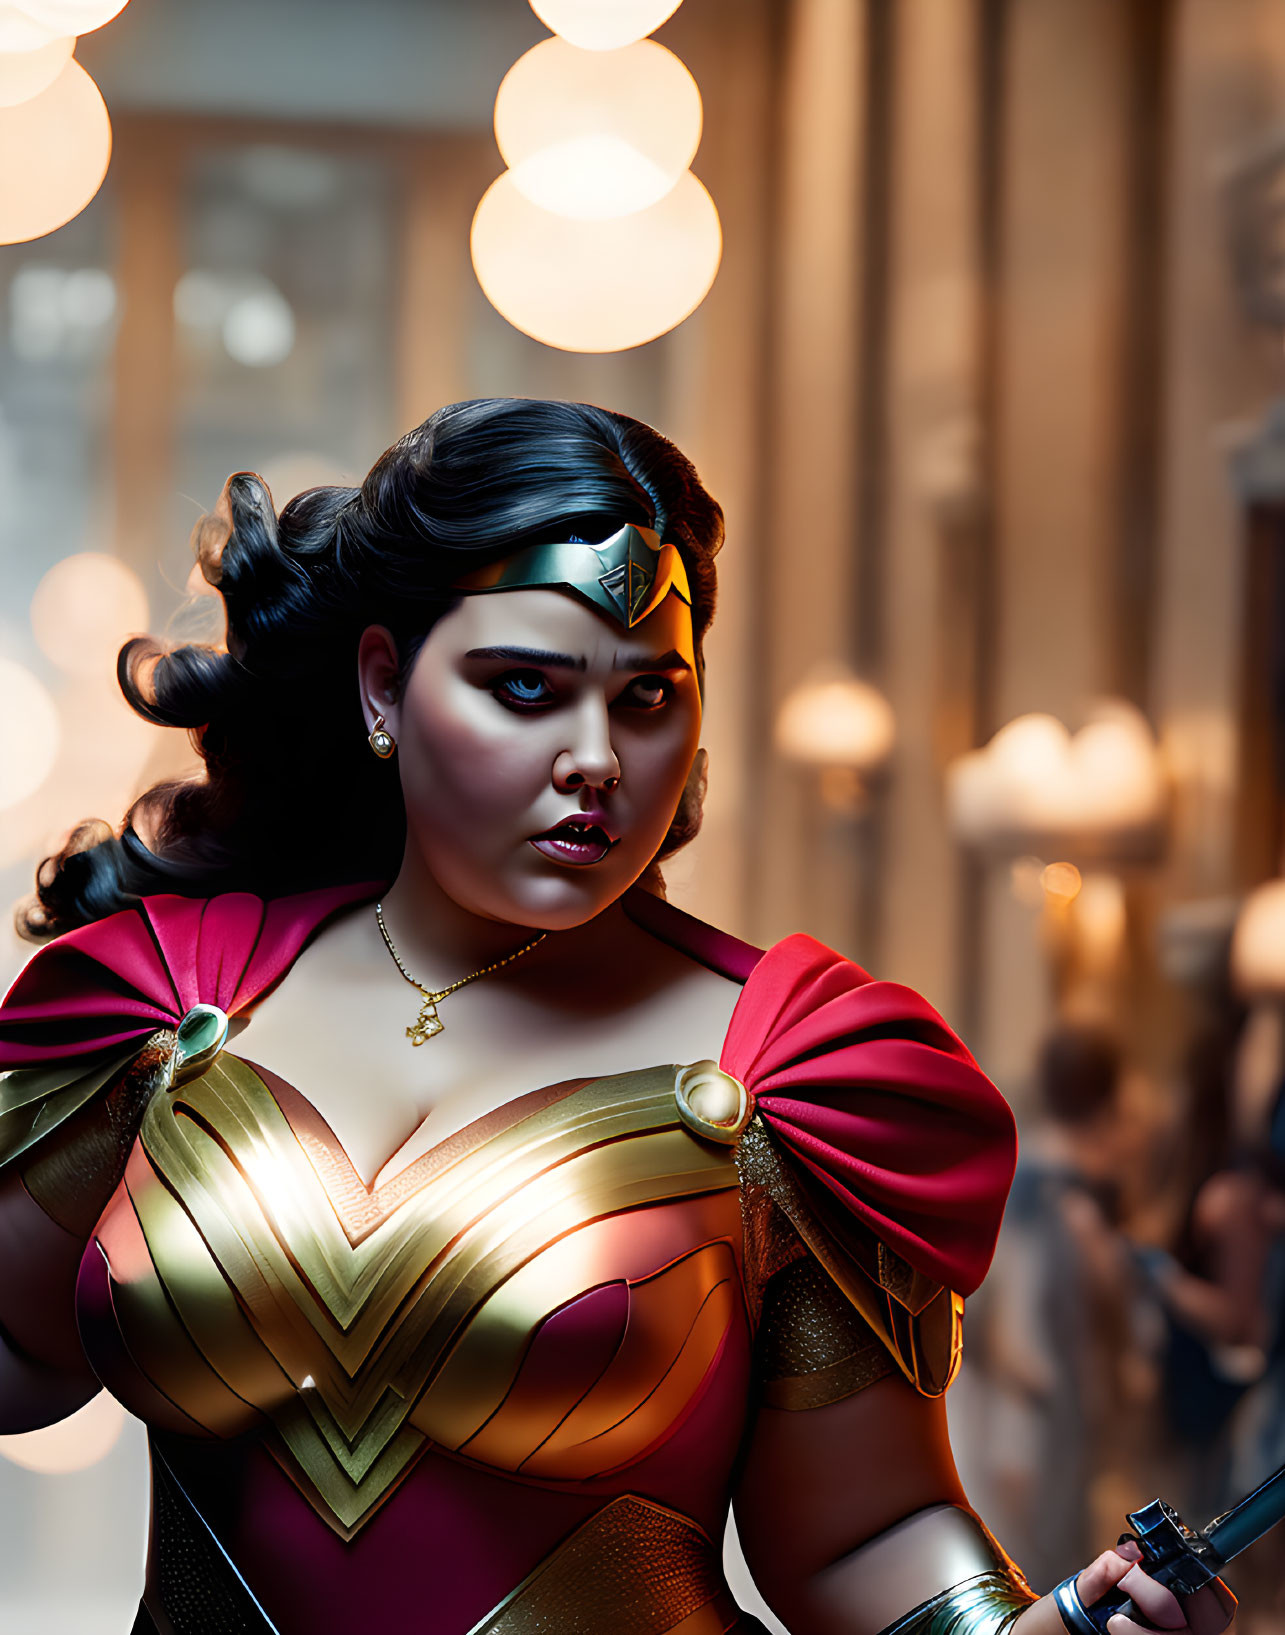 Elaborate Wonder Woman costume with tiara and determined expression